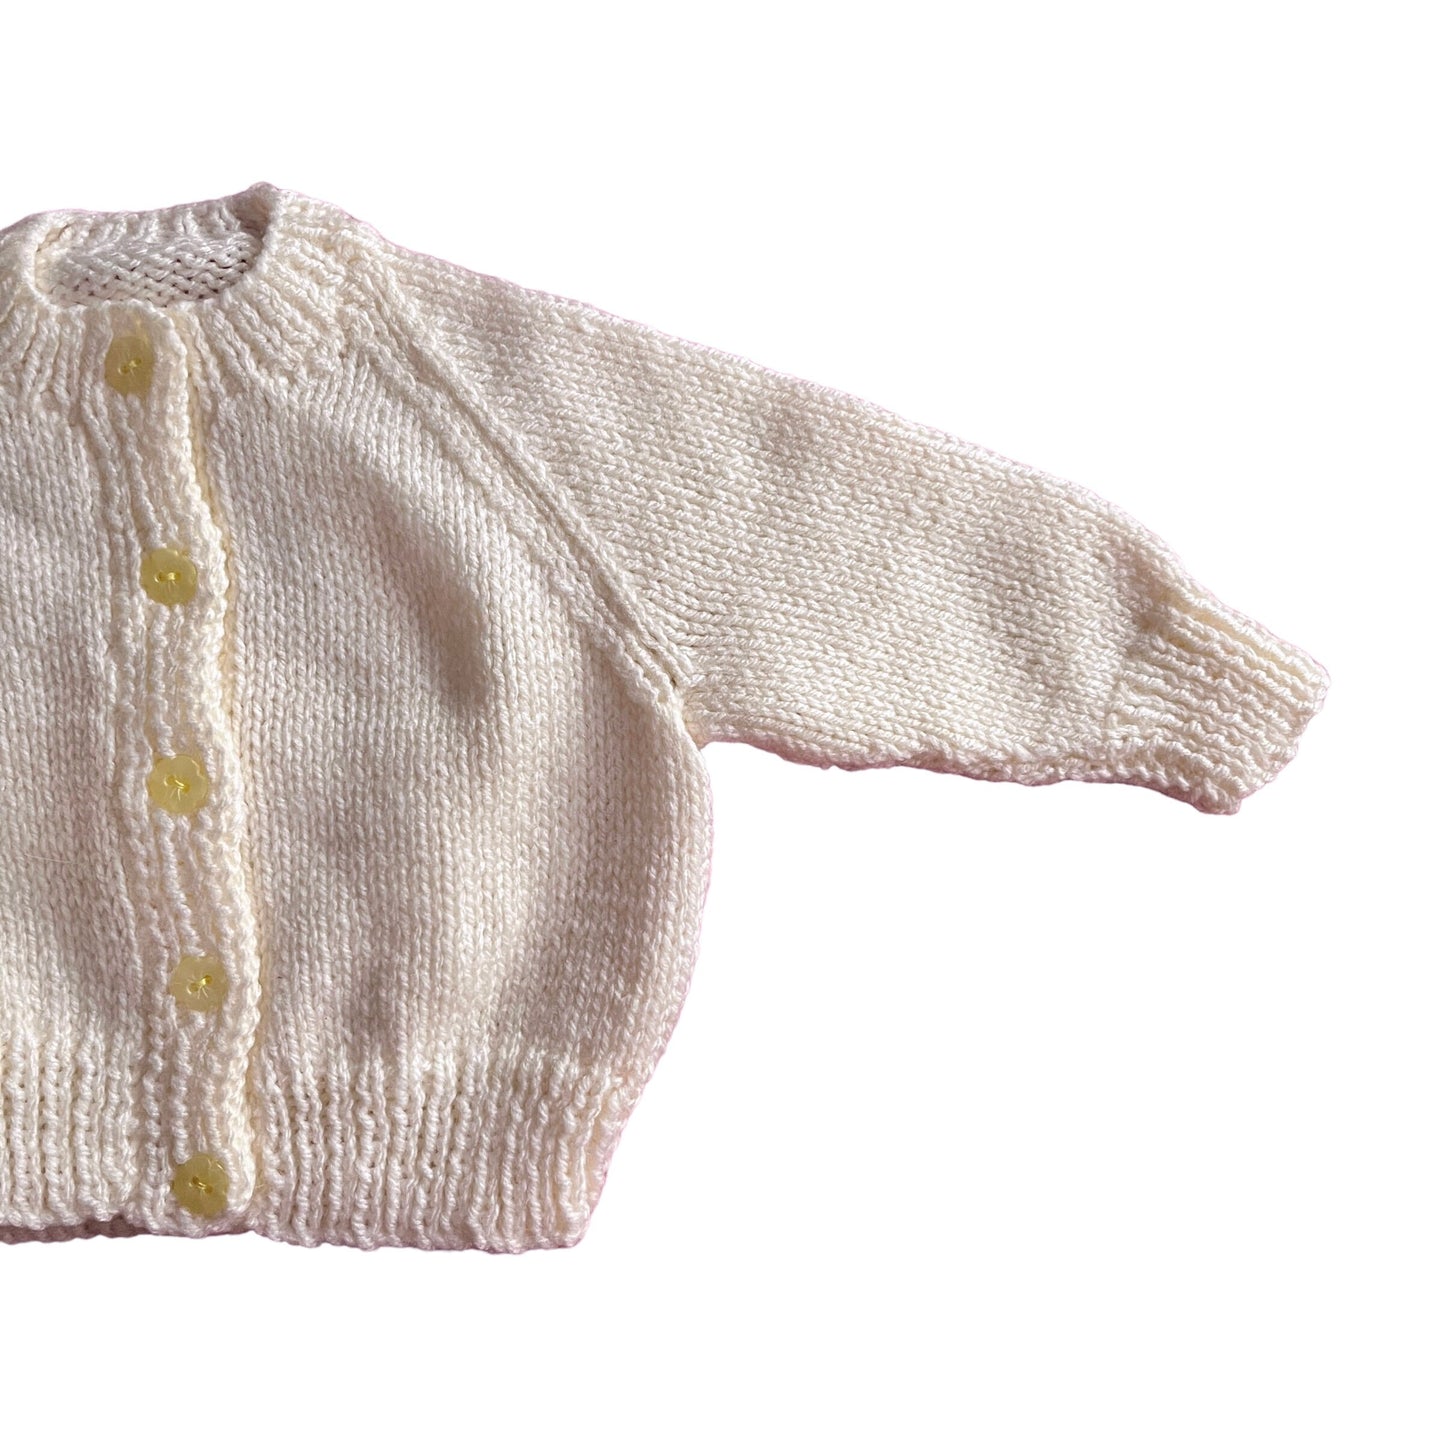 Vintage Very Pale Yellow Cardigan 0-6 Months